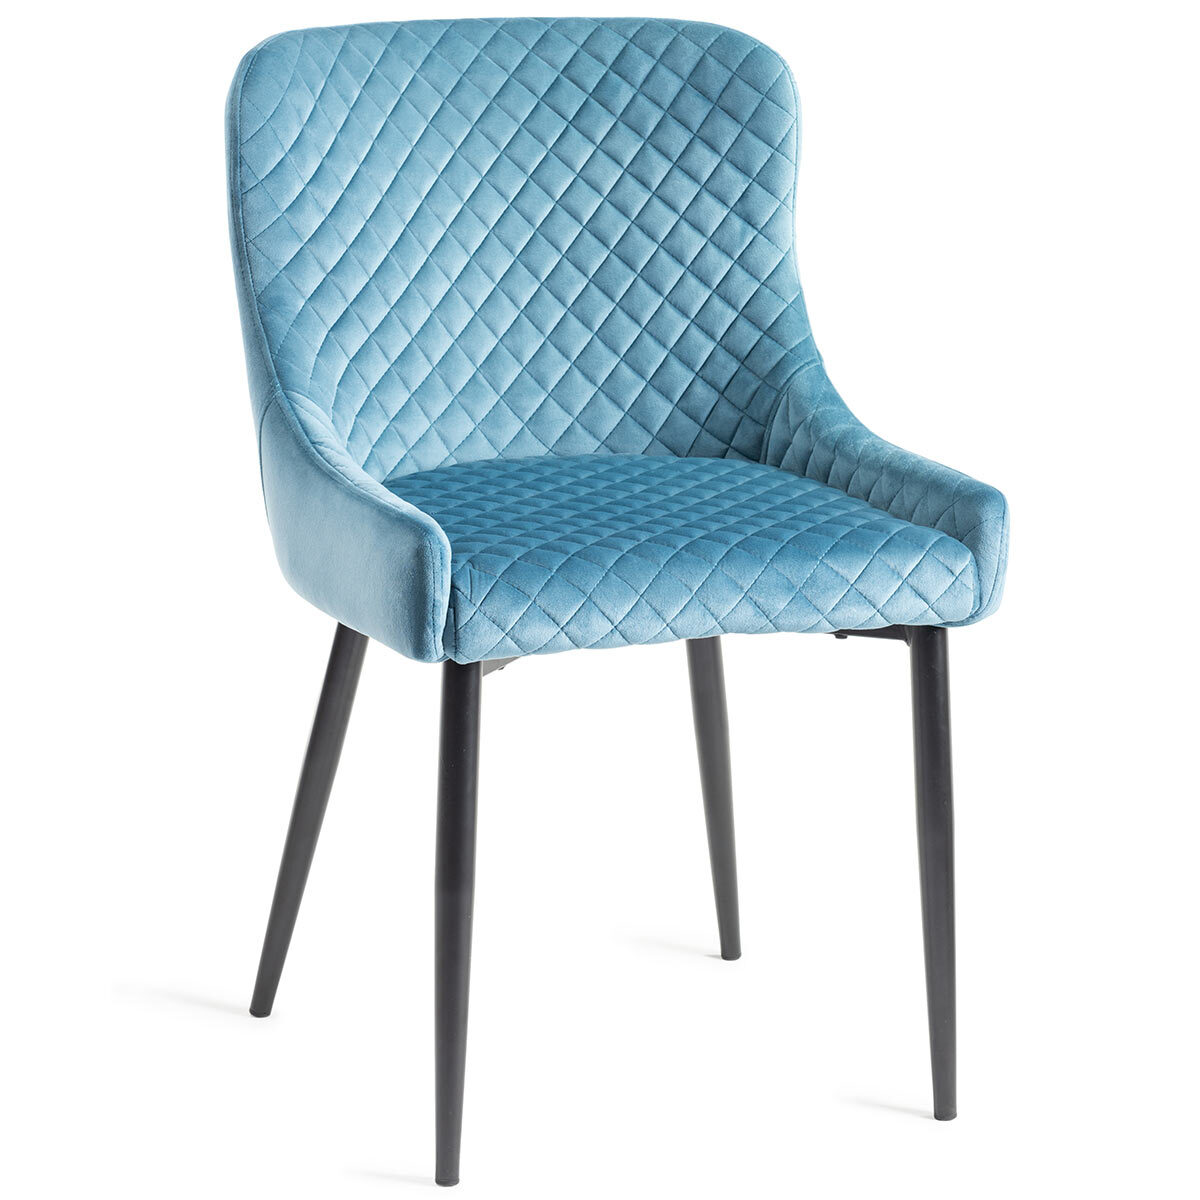 Grey Velvet Diamond Stiched Chair. 2 Pack